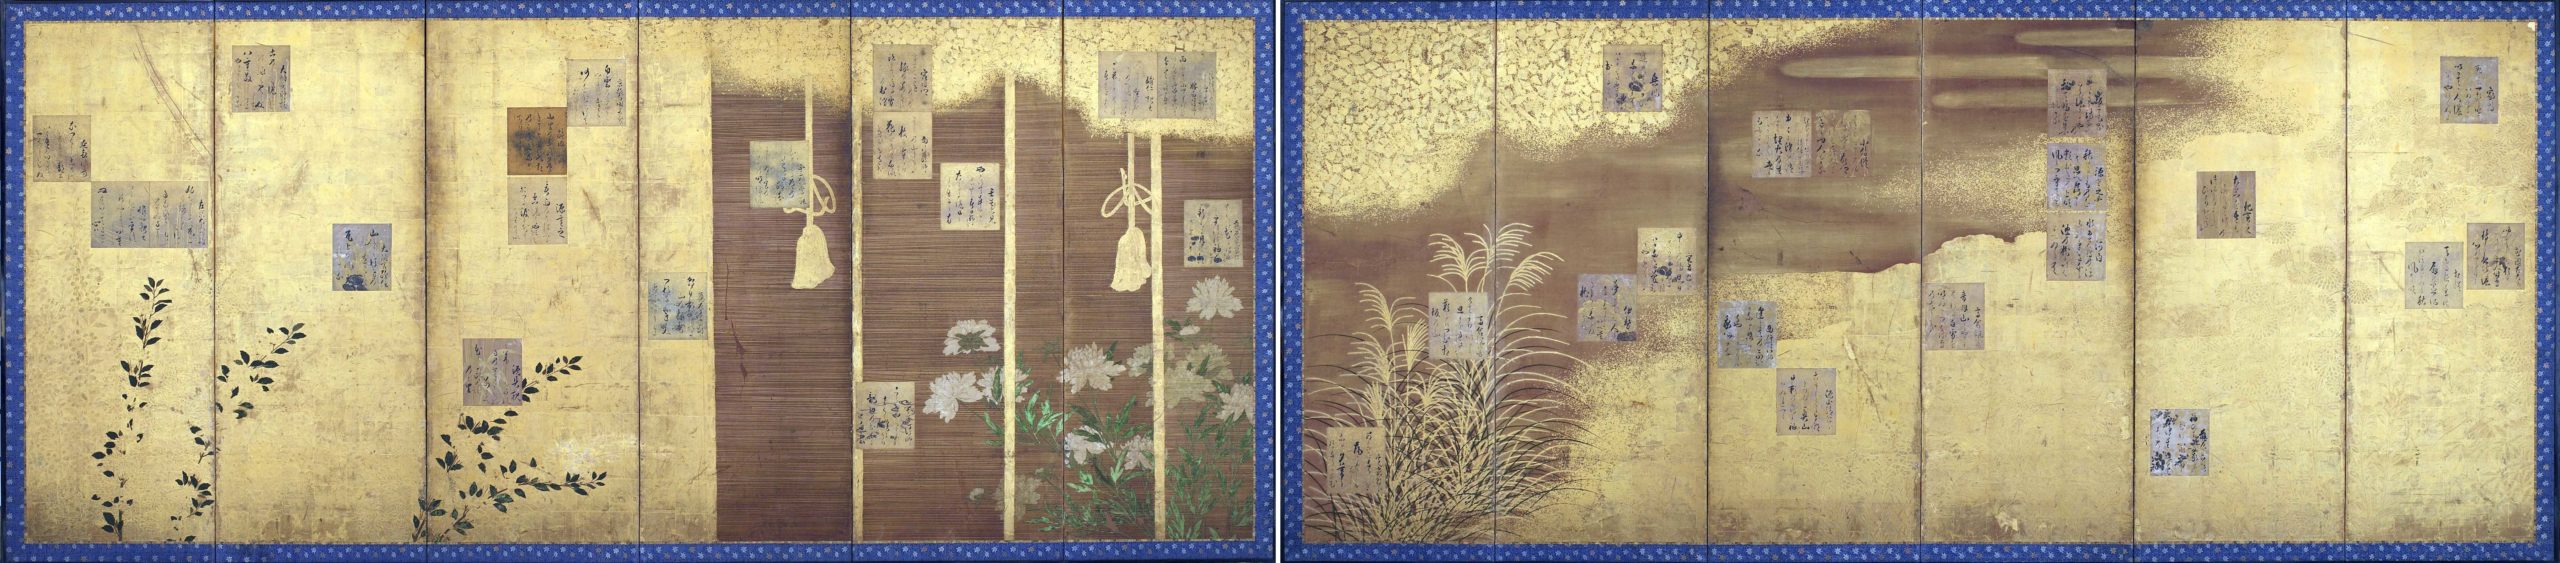 Hon'ami Kōetsu, Folding screens mounted with poems from the anthology, Shin kokinshu, Edo period, ca. 1624-1637, ink, color, and gold on paper, Japan, 168.2 x 375.7 cm and 168.2 x 377.2 cm (Freer Gallery of Art 0